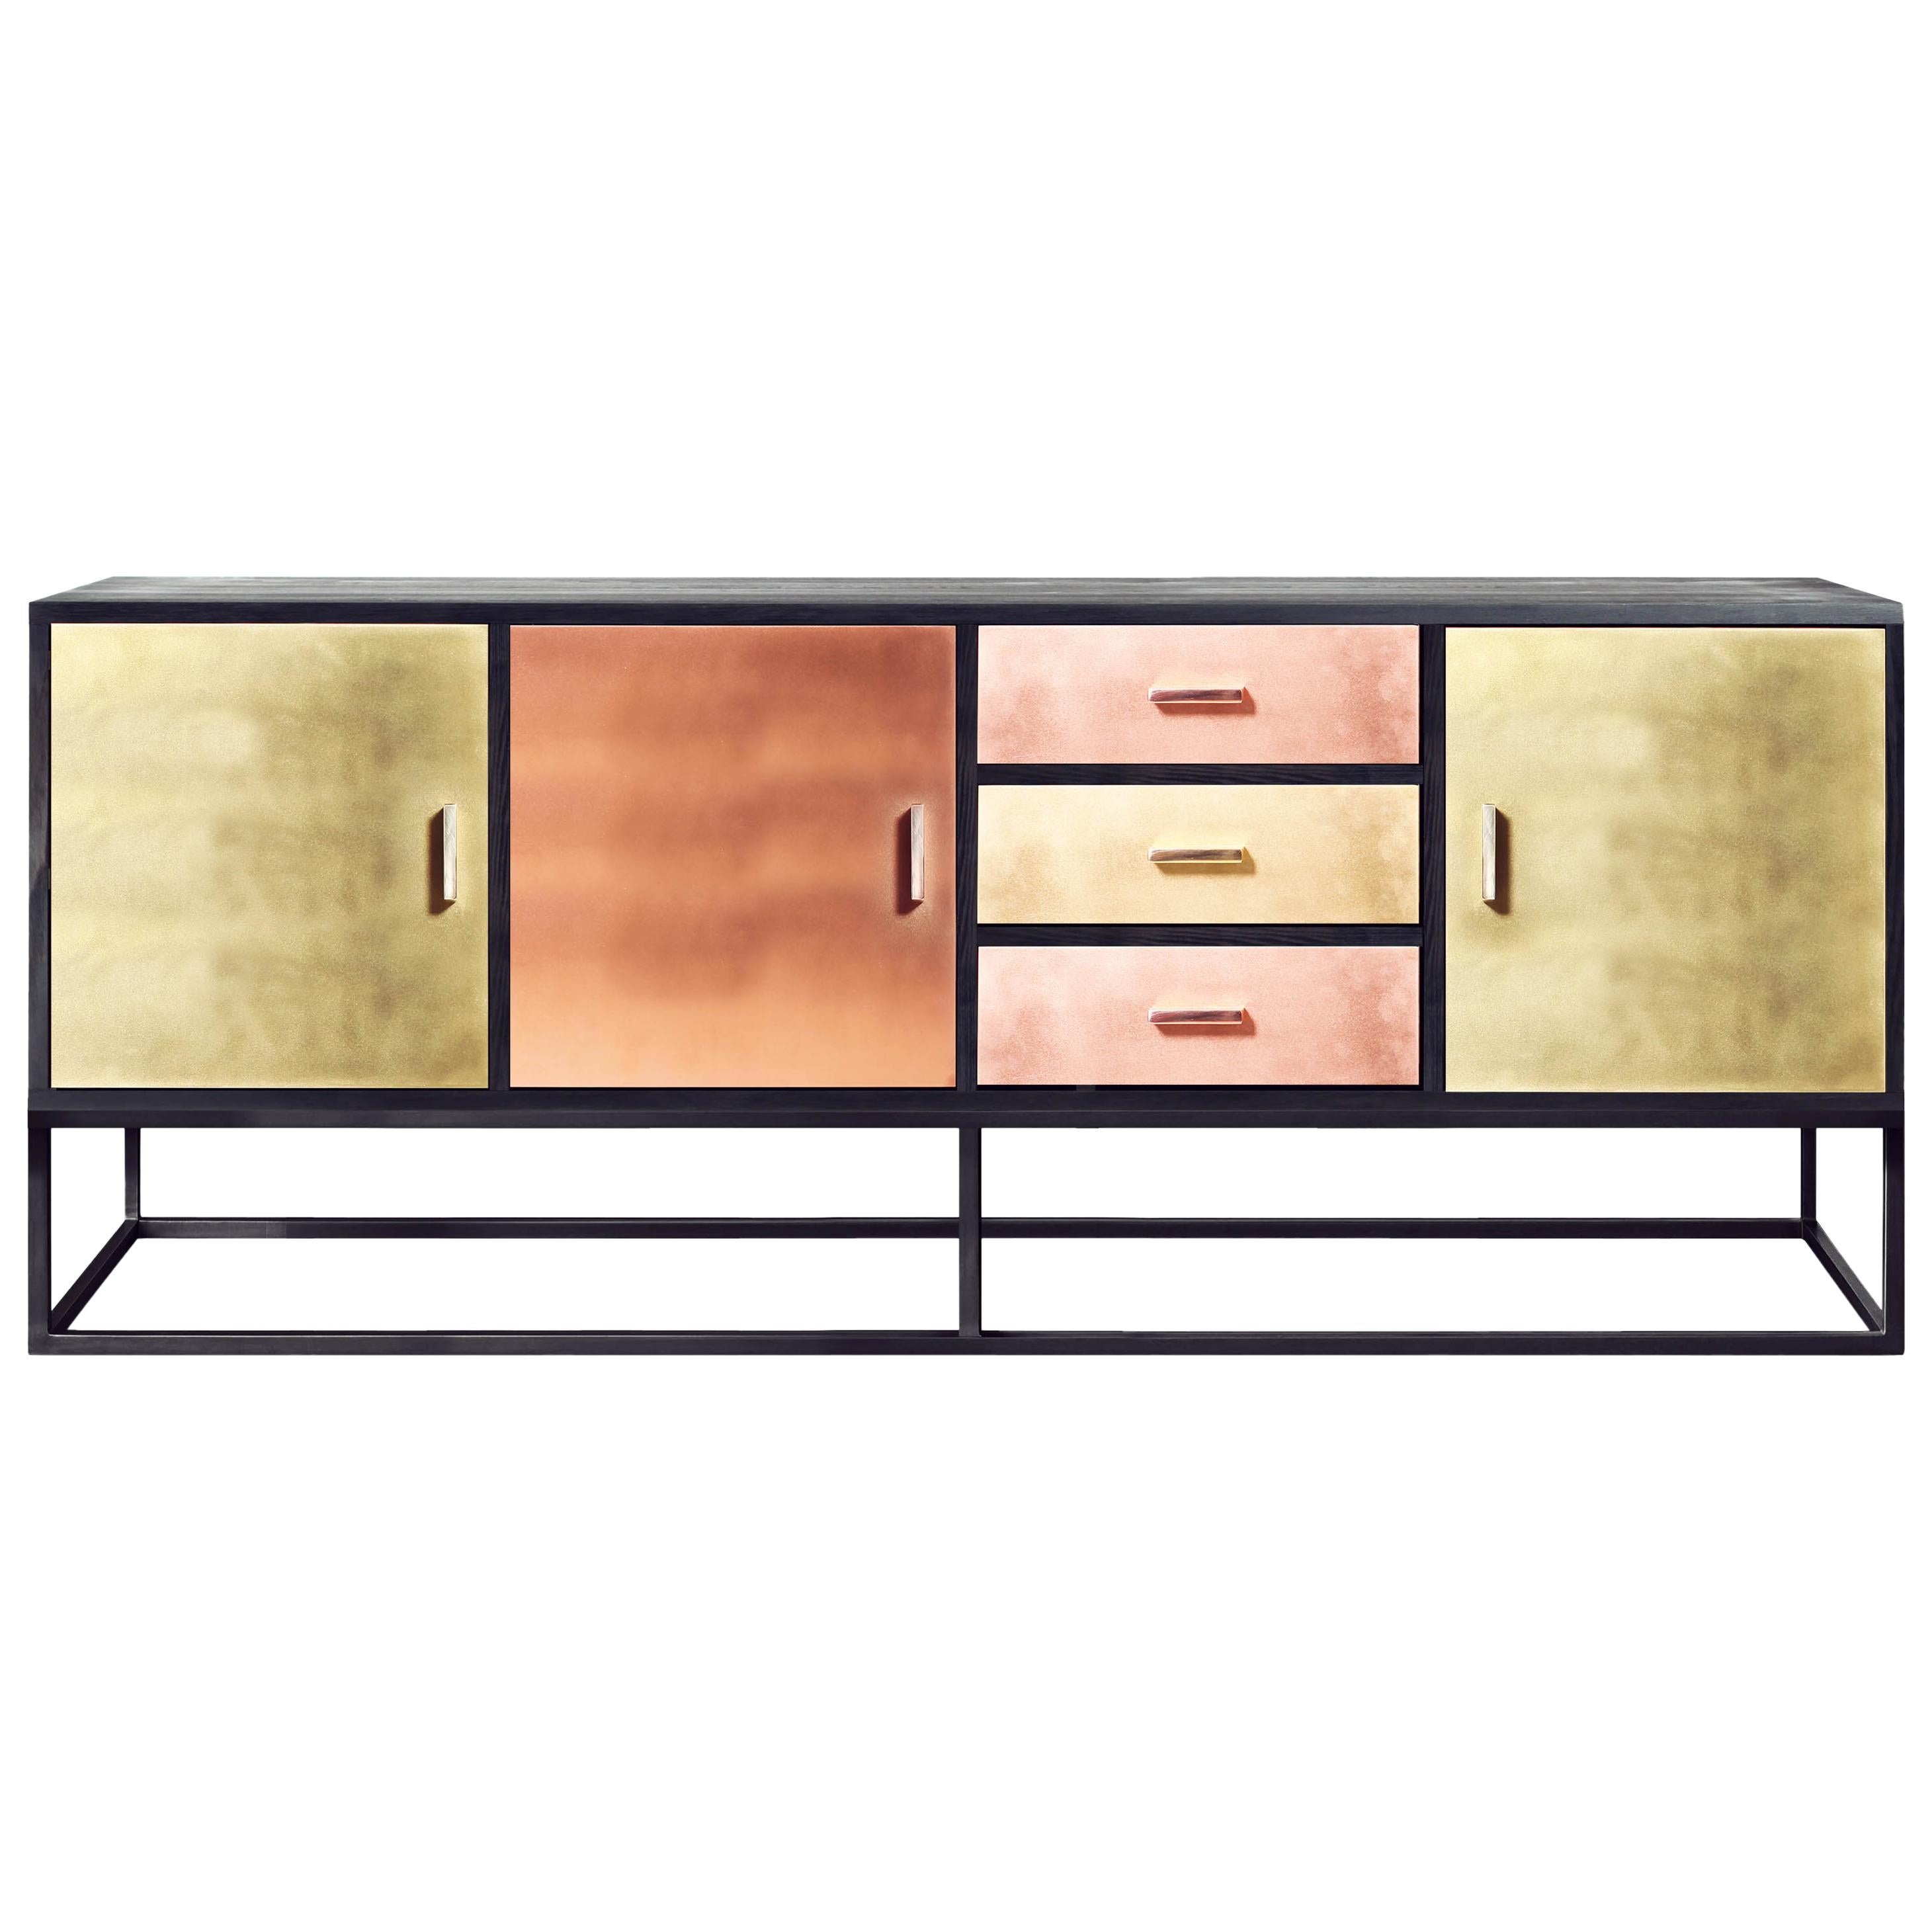 Contemporary Reykjavik Sideboard in Brass, Bronze and Copper